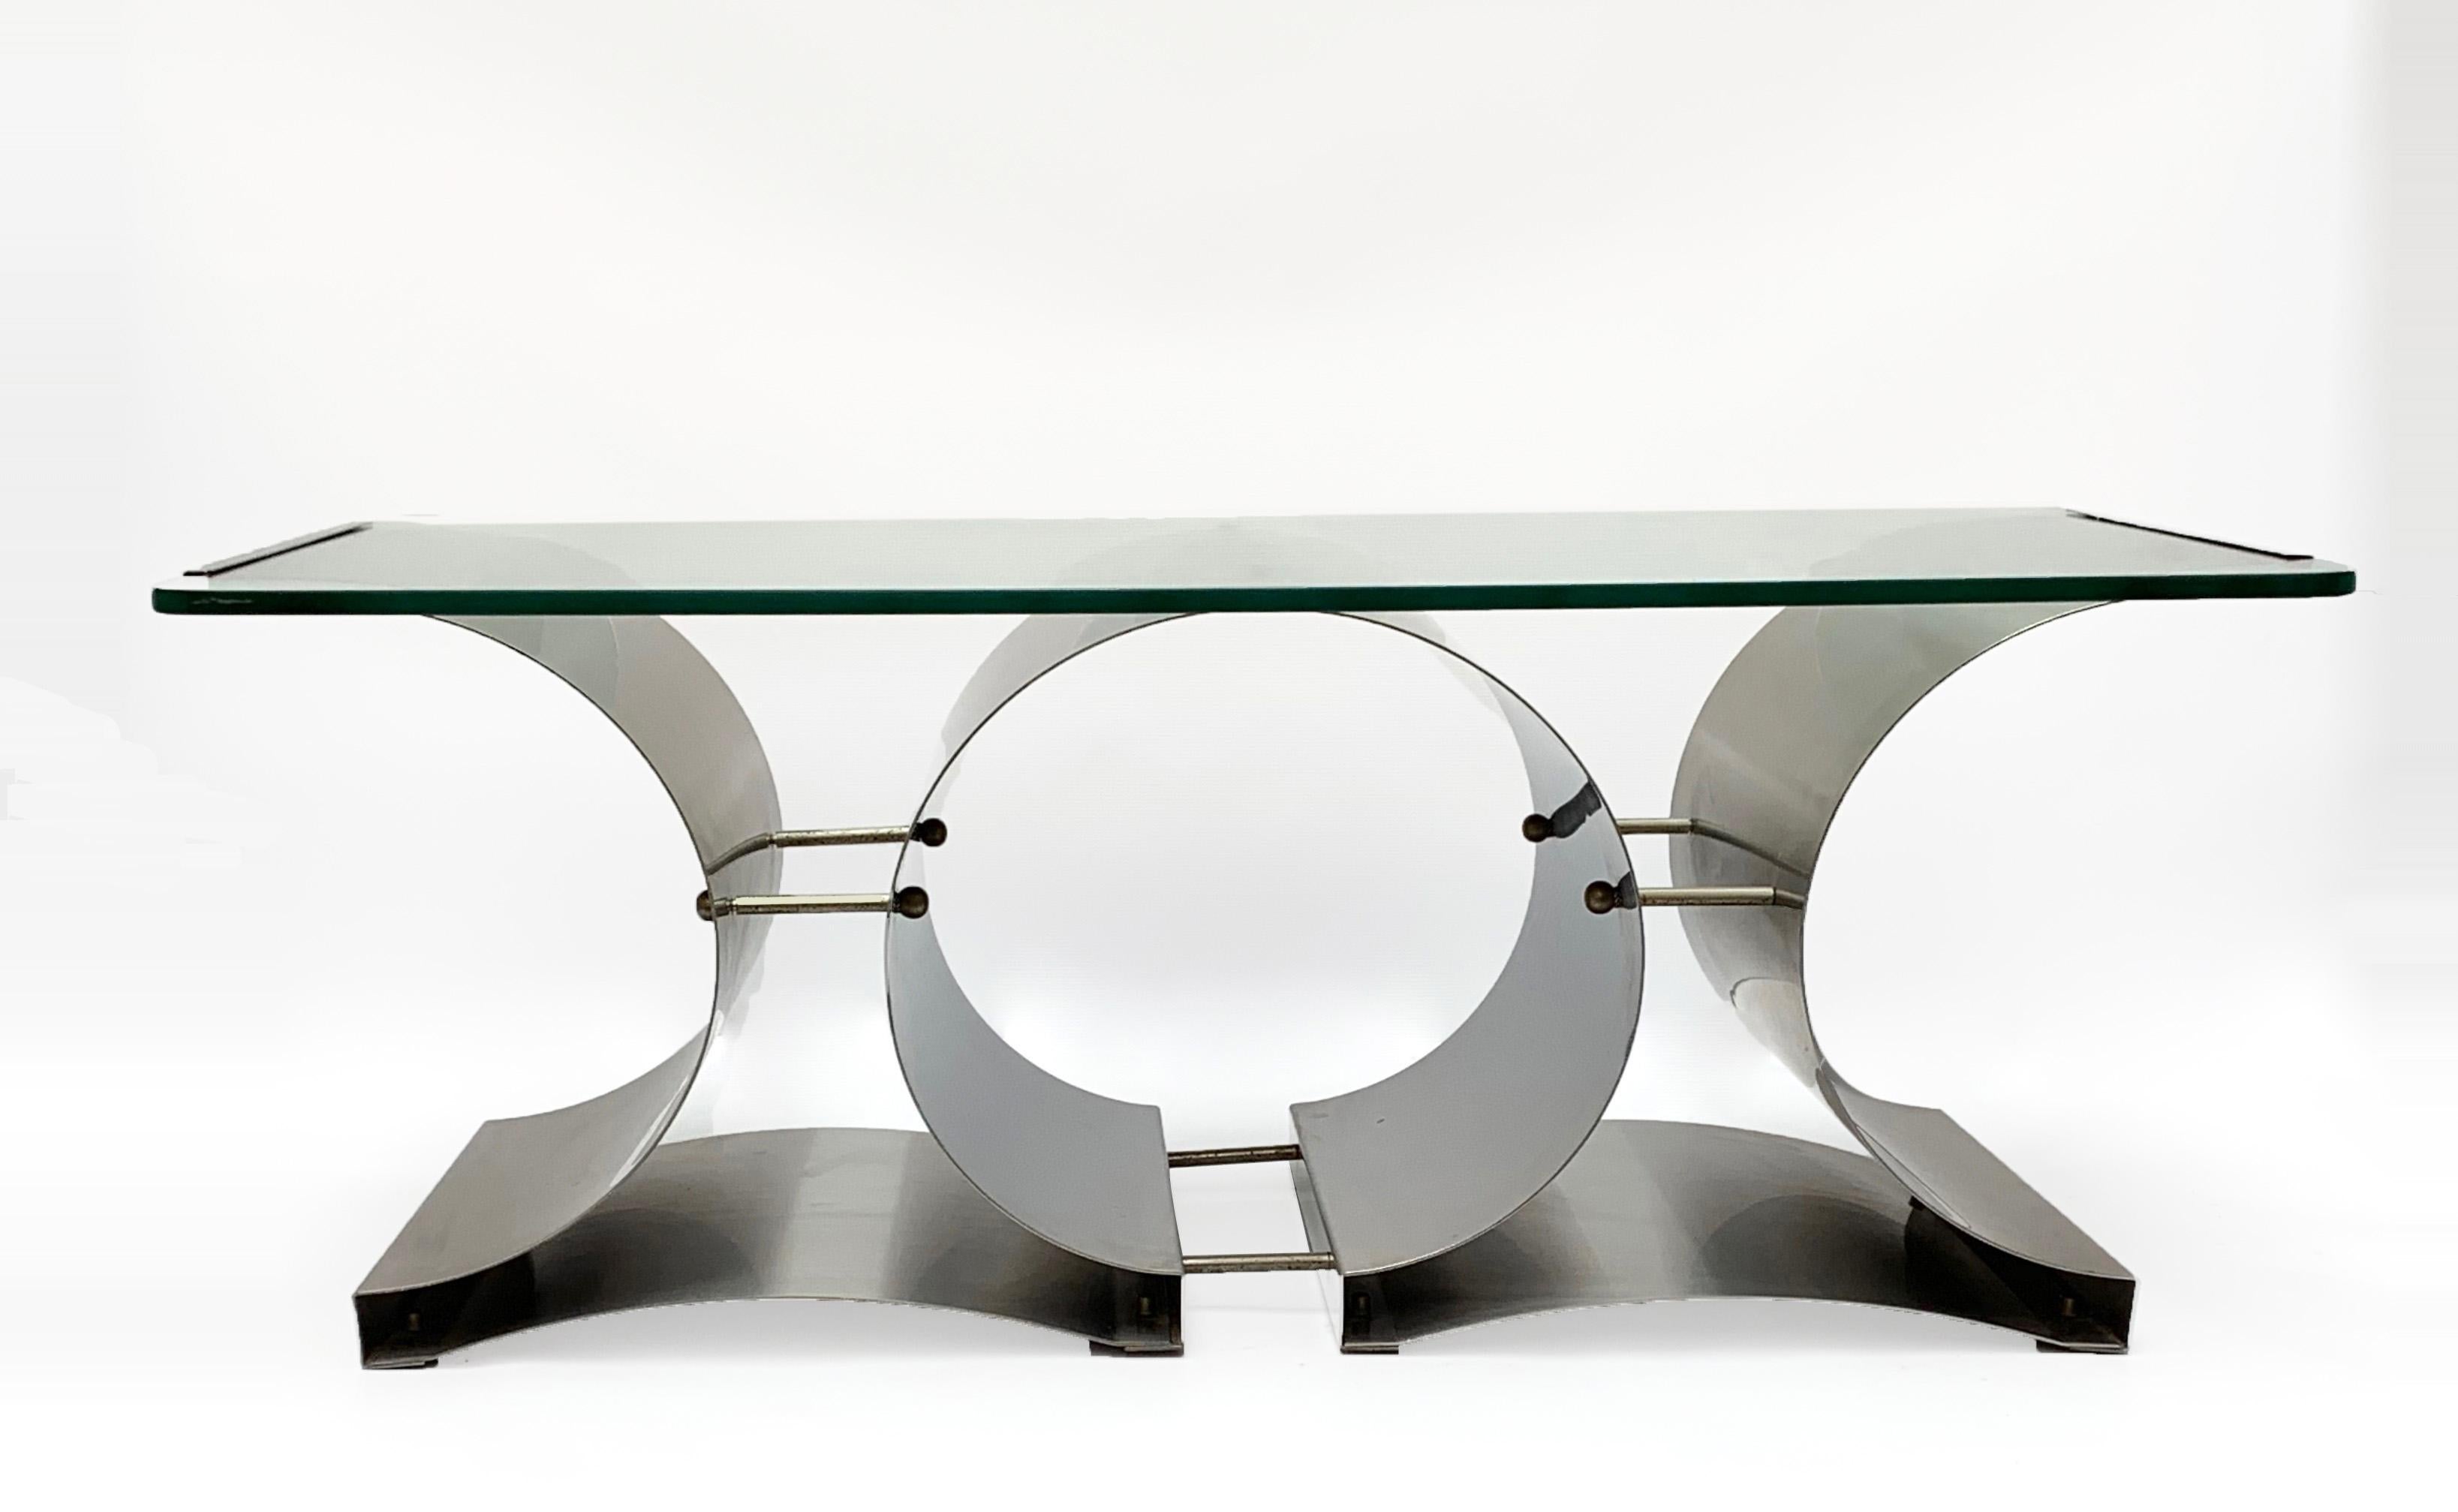 Amazing midcentury brushed stainless steel coffee table with crystal glass top. This wonderful piece was designed by Francois Monnet in France during 1970s.

This high-quality table has a brushed stainless steel base and a crystal glass top that